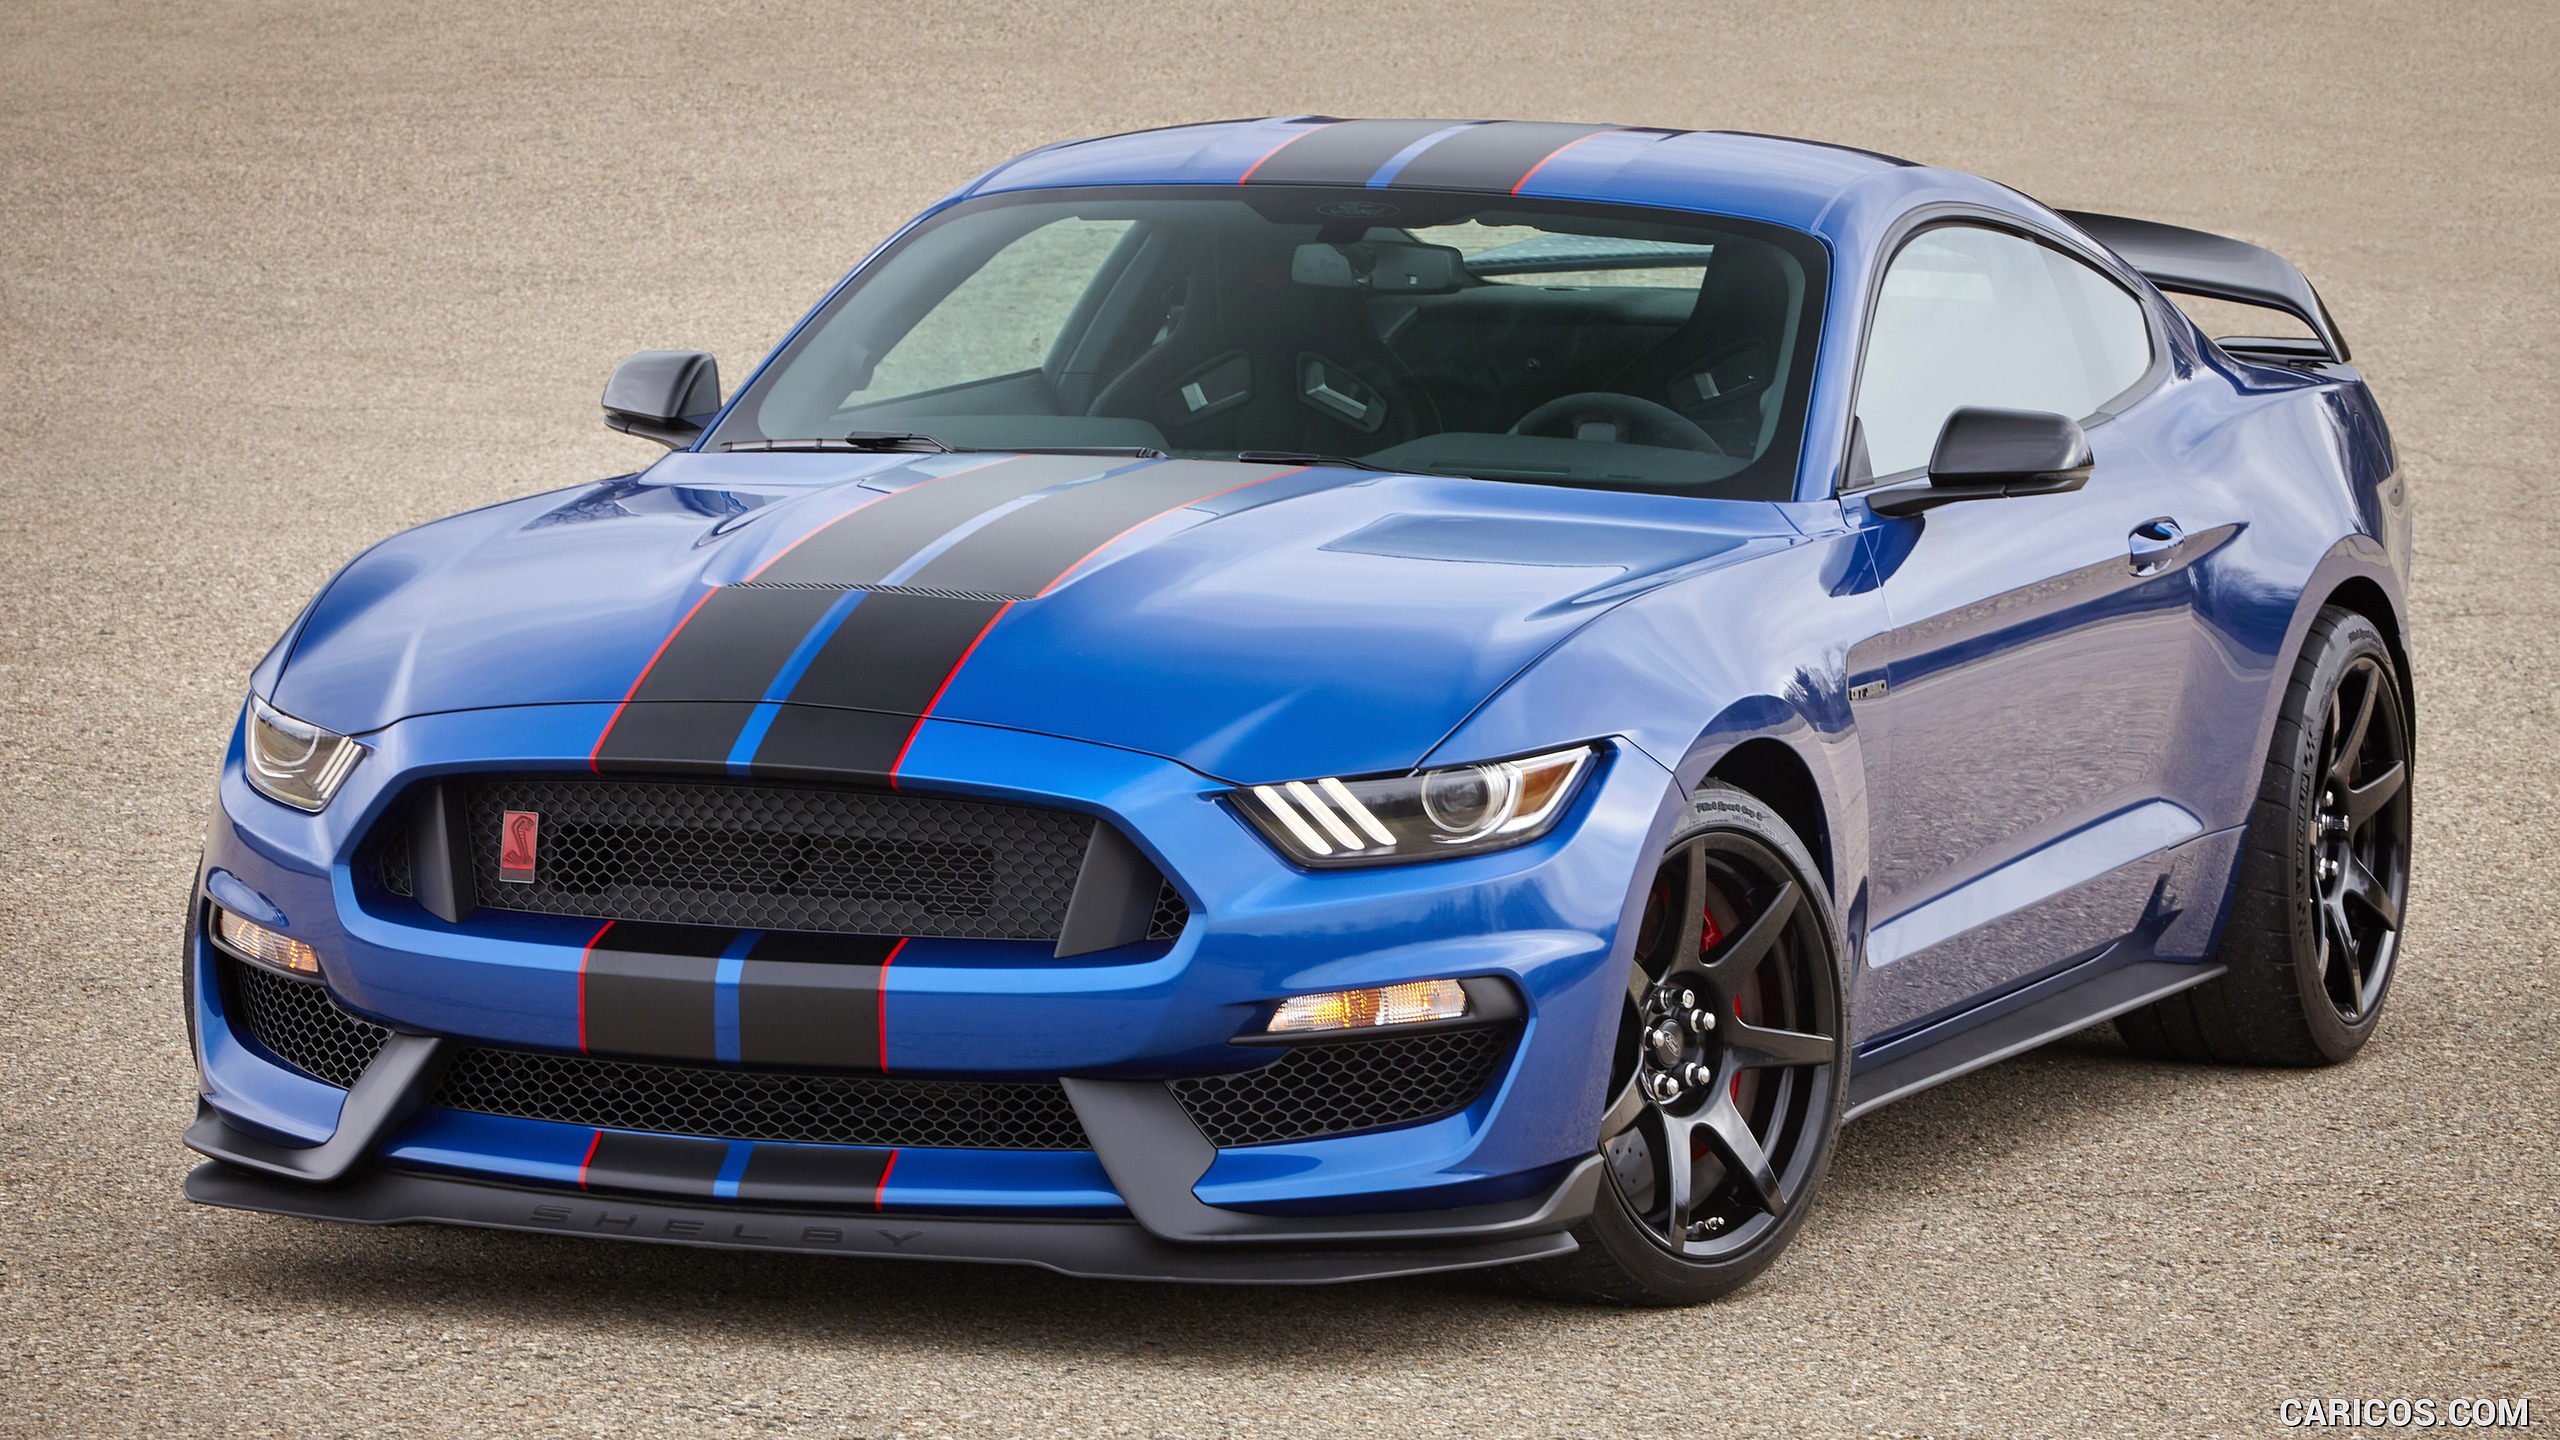 2017 Ford Mustang Shelby Gt350r Color Lightning Blue Front Hd